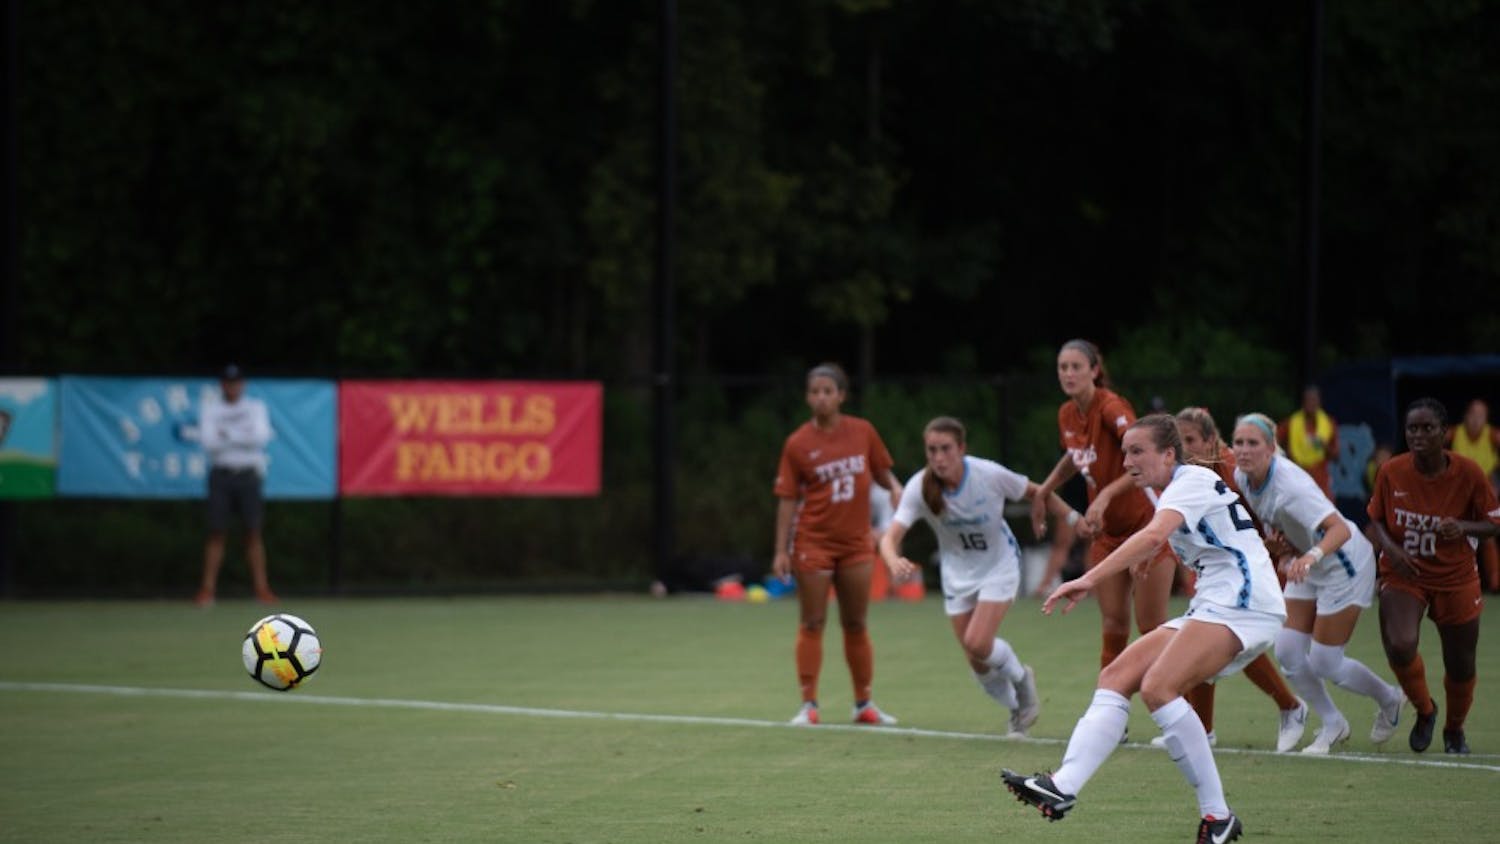 UNC senior midfielder Dorian Bailey (29) shoots a penalty kick against No. 21 Texas in the first half of the team's 1-1 tie on Aug. 22 at Finley Field South.